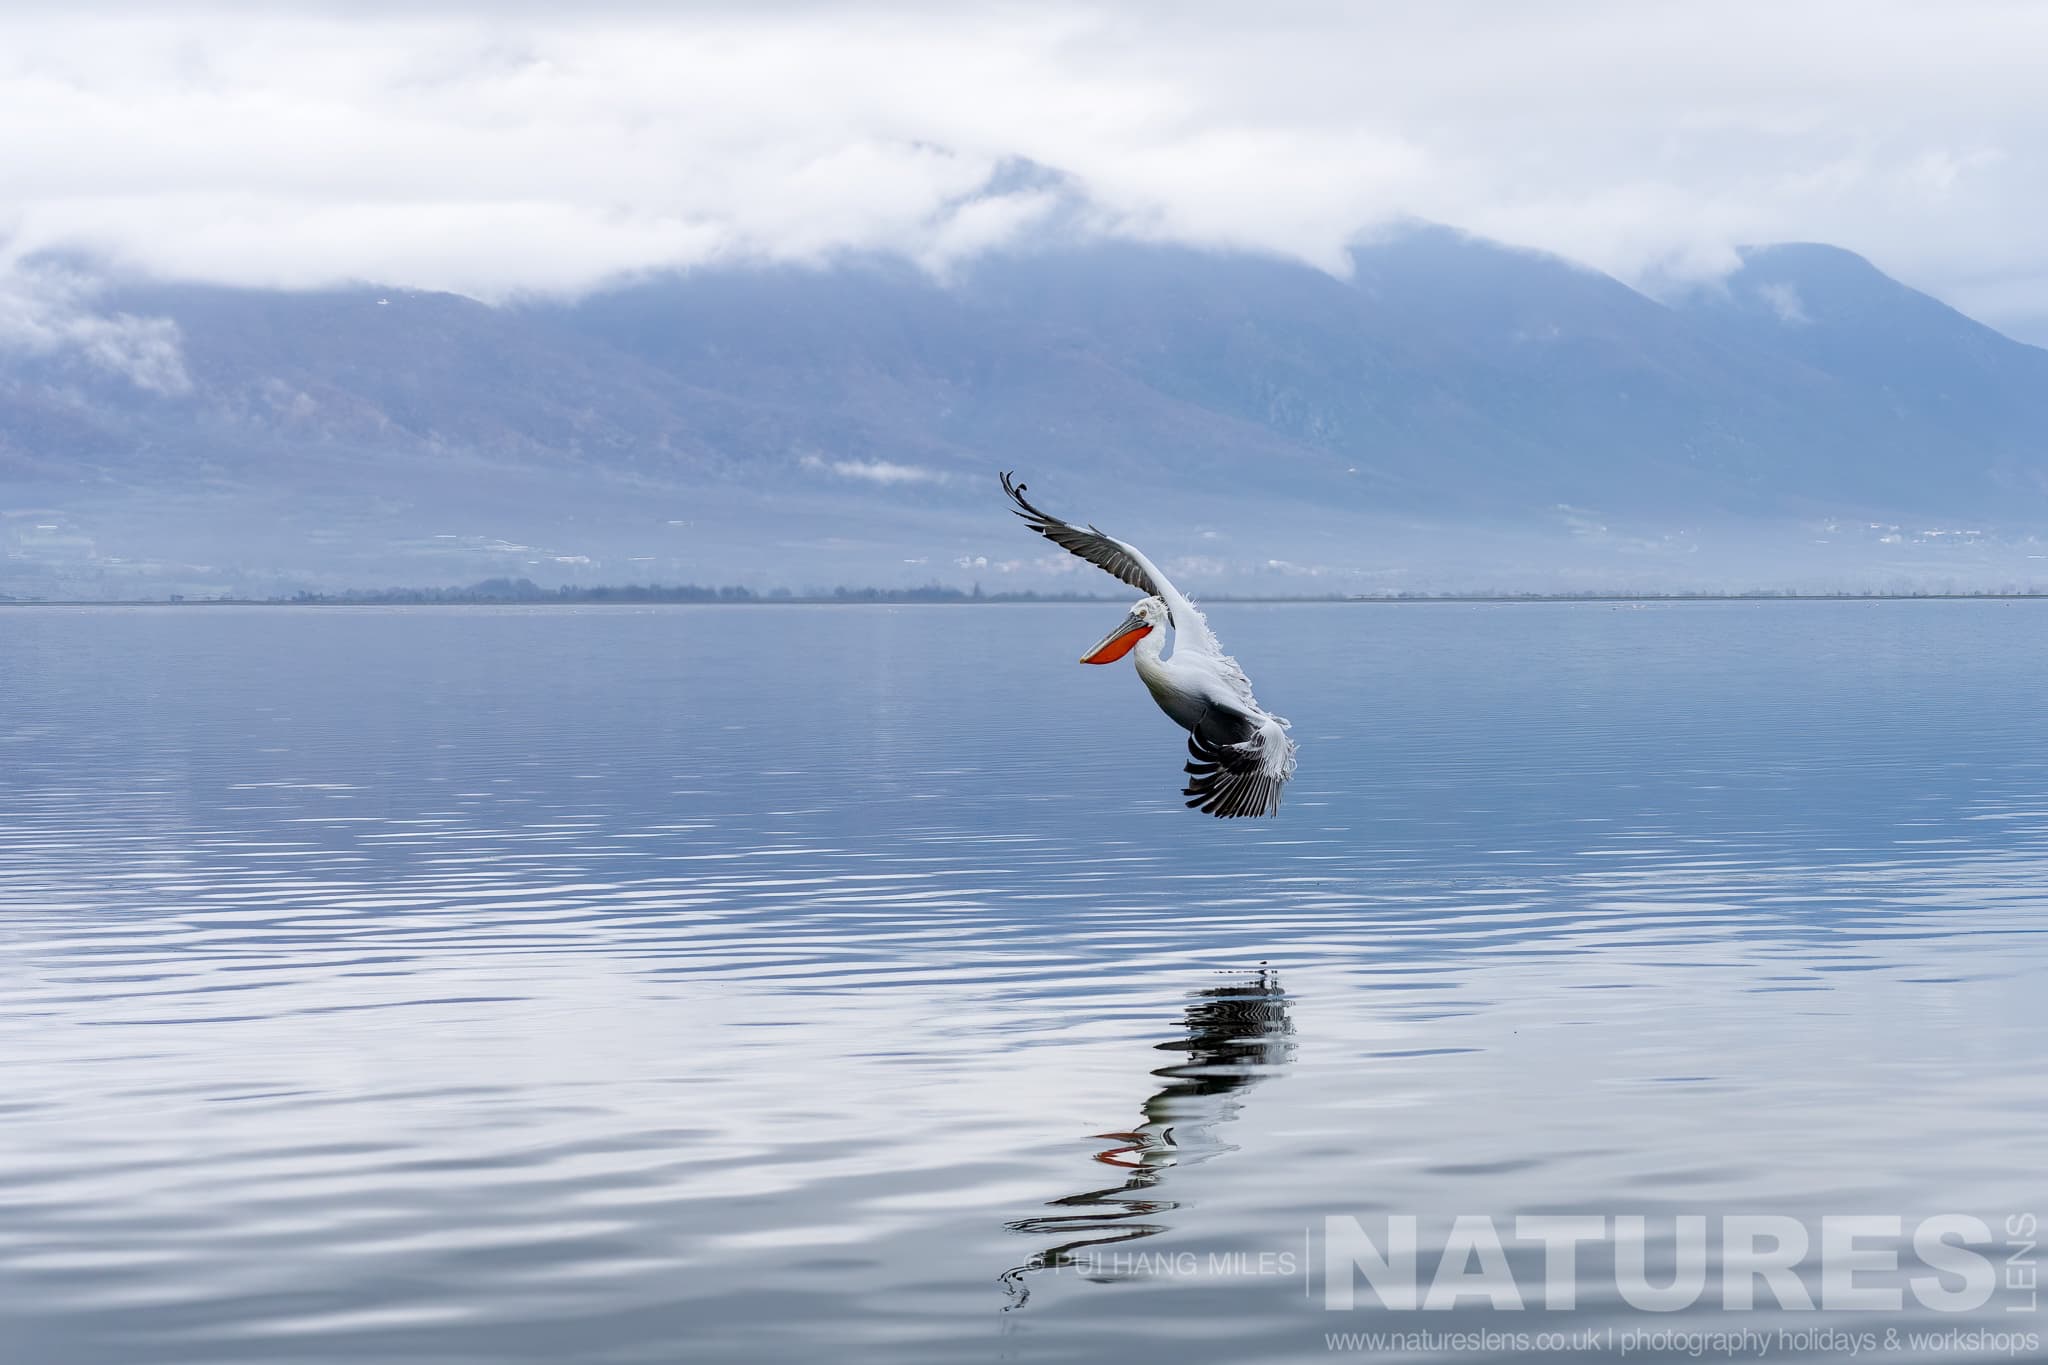 One Of The Dalmatian Pelicans Of Greece Flying Over The Waters Of Lake Kerkini